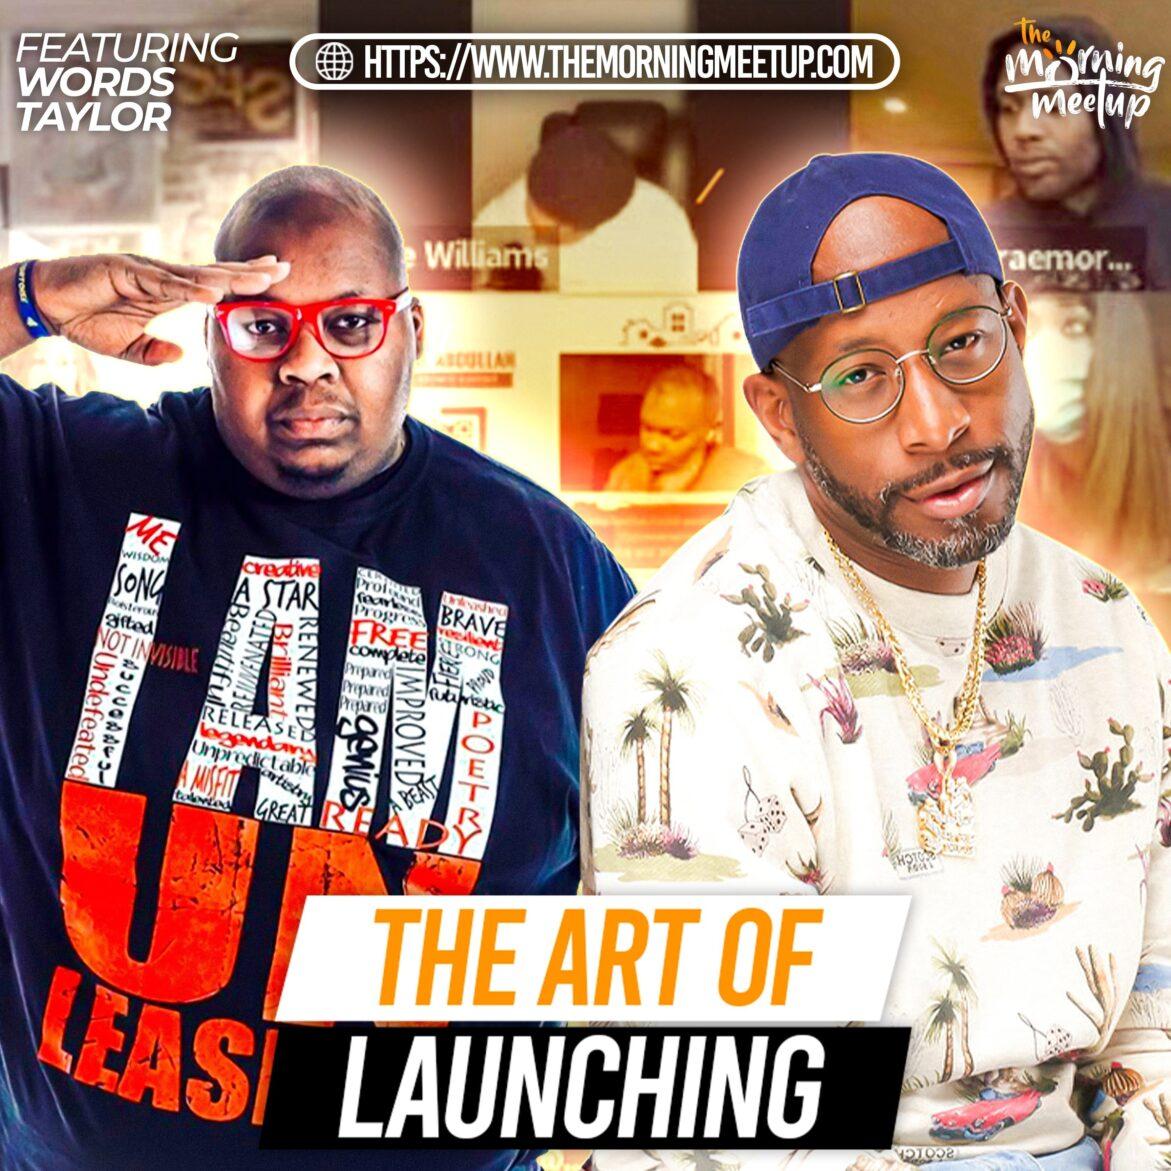 Black Podcasting - The Art Of Launching - Words Taylor (The Morning Meetup)